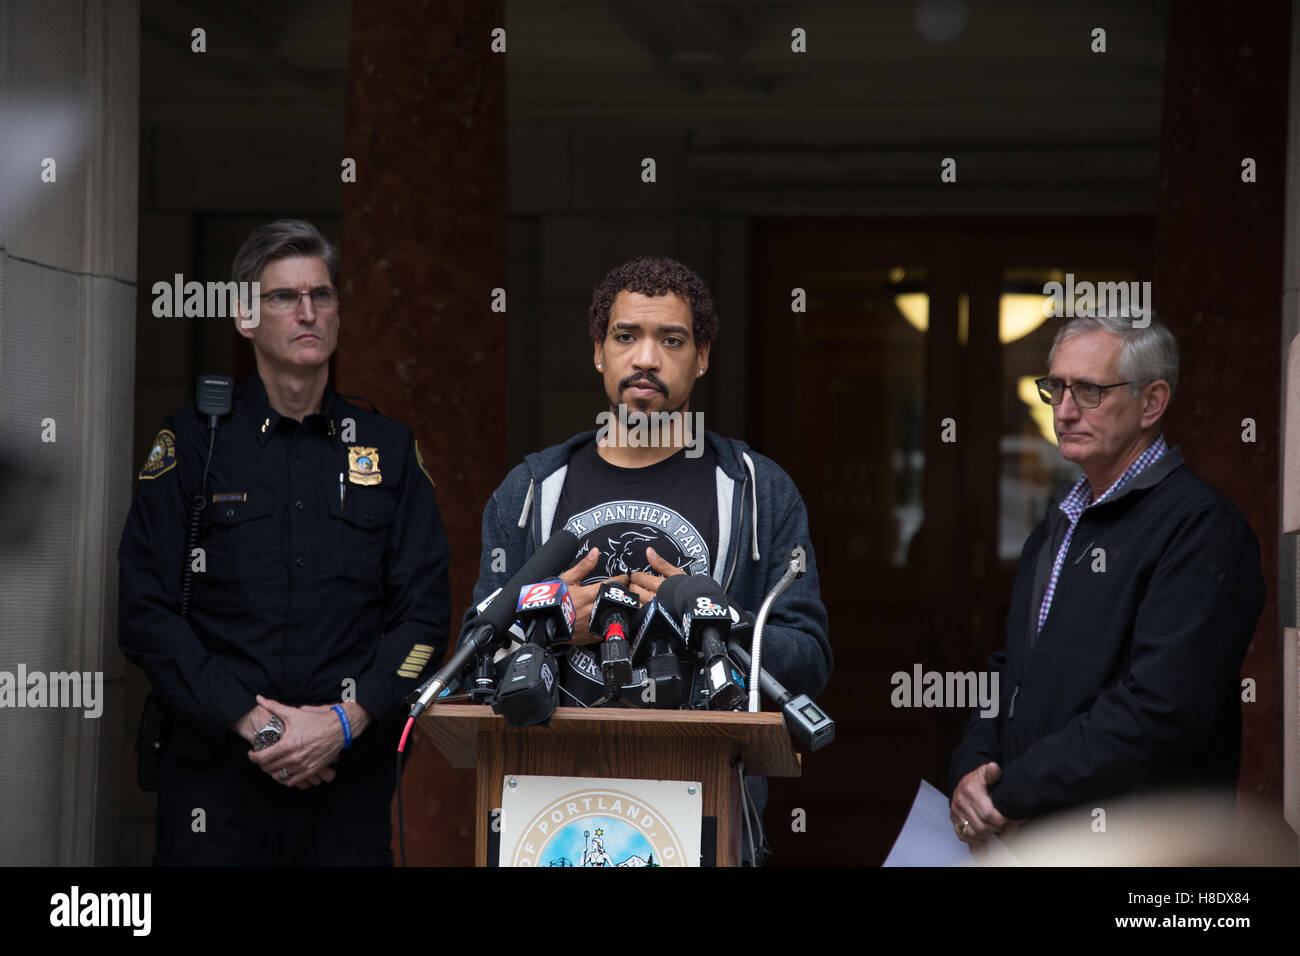 Portland, USA. 11th November, 2016. Portland Oregon 'Not My President' protest organizer speaks during a press conference urging people not to riot in the wake of the 2016 presidential election. Rioters have caused more than one million dollars in damages to the city of Portland during the 'Not My President' protests. Credit:  Joshua Rainey/Alamy Live News. Stock Photo